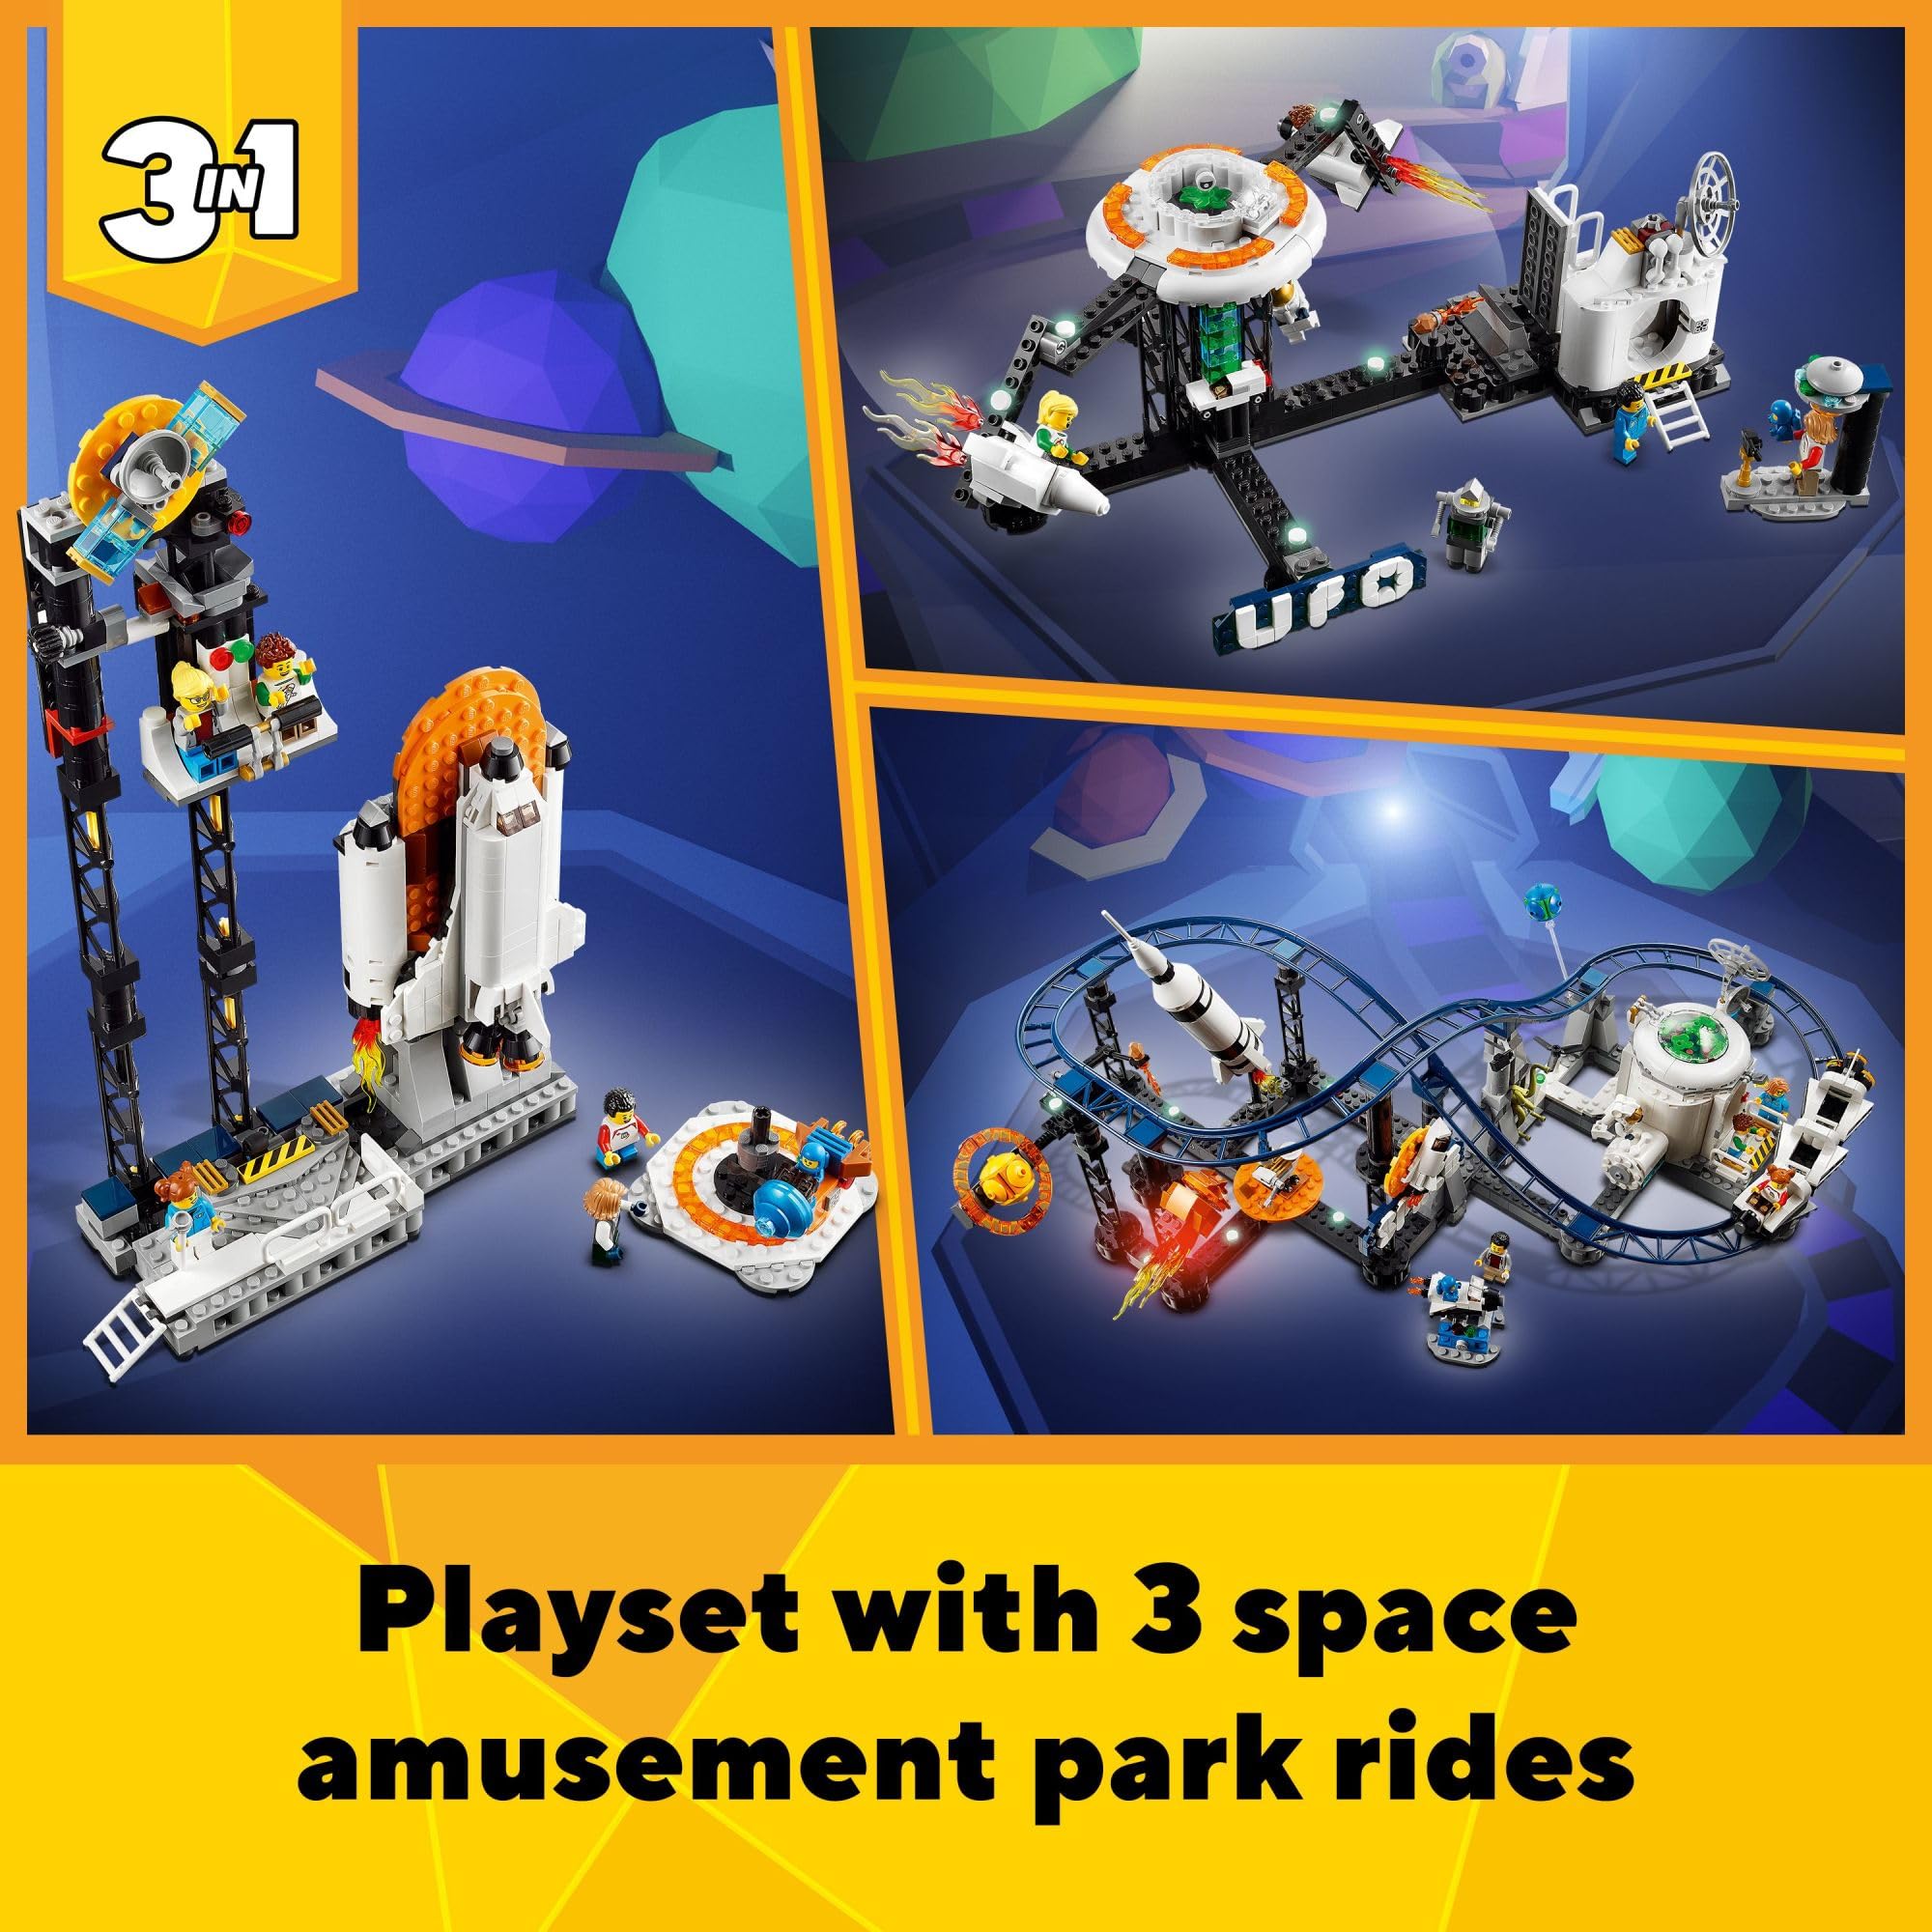 LEGO Creator Space Roller Coaster 31142 3 in 1 Building Toy Set Featuring a Roller Coaster, Drop Tower, Carousel and 5 Minifigures, Rebuildable Amusement Park for Kids Ages 9+